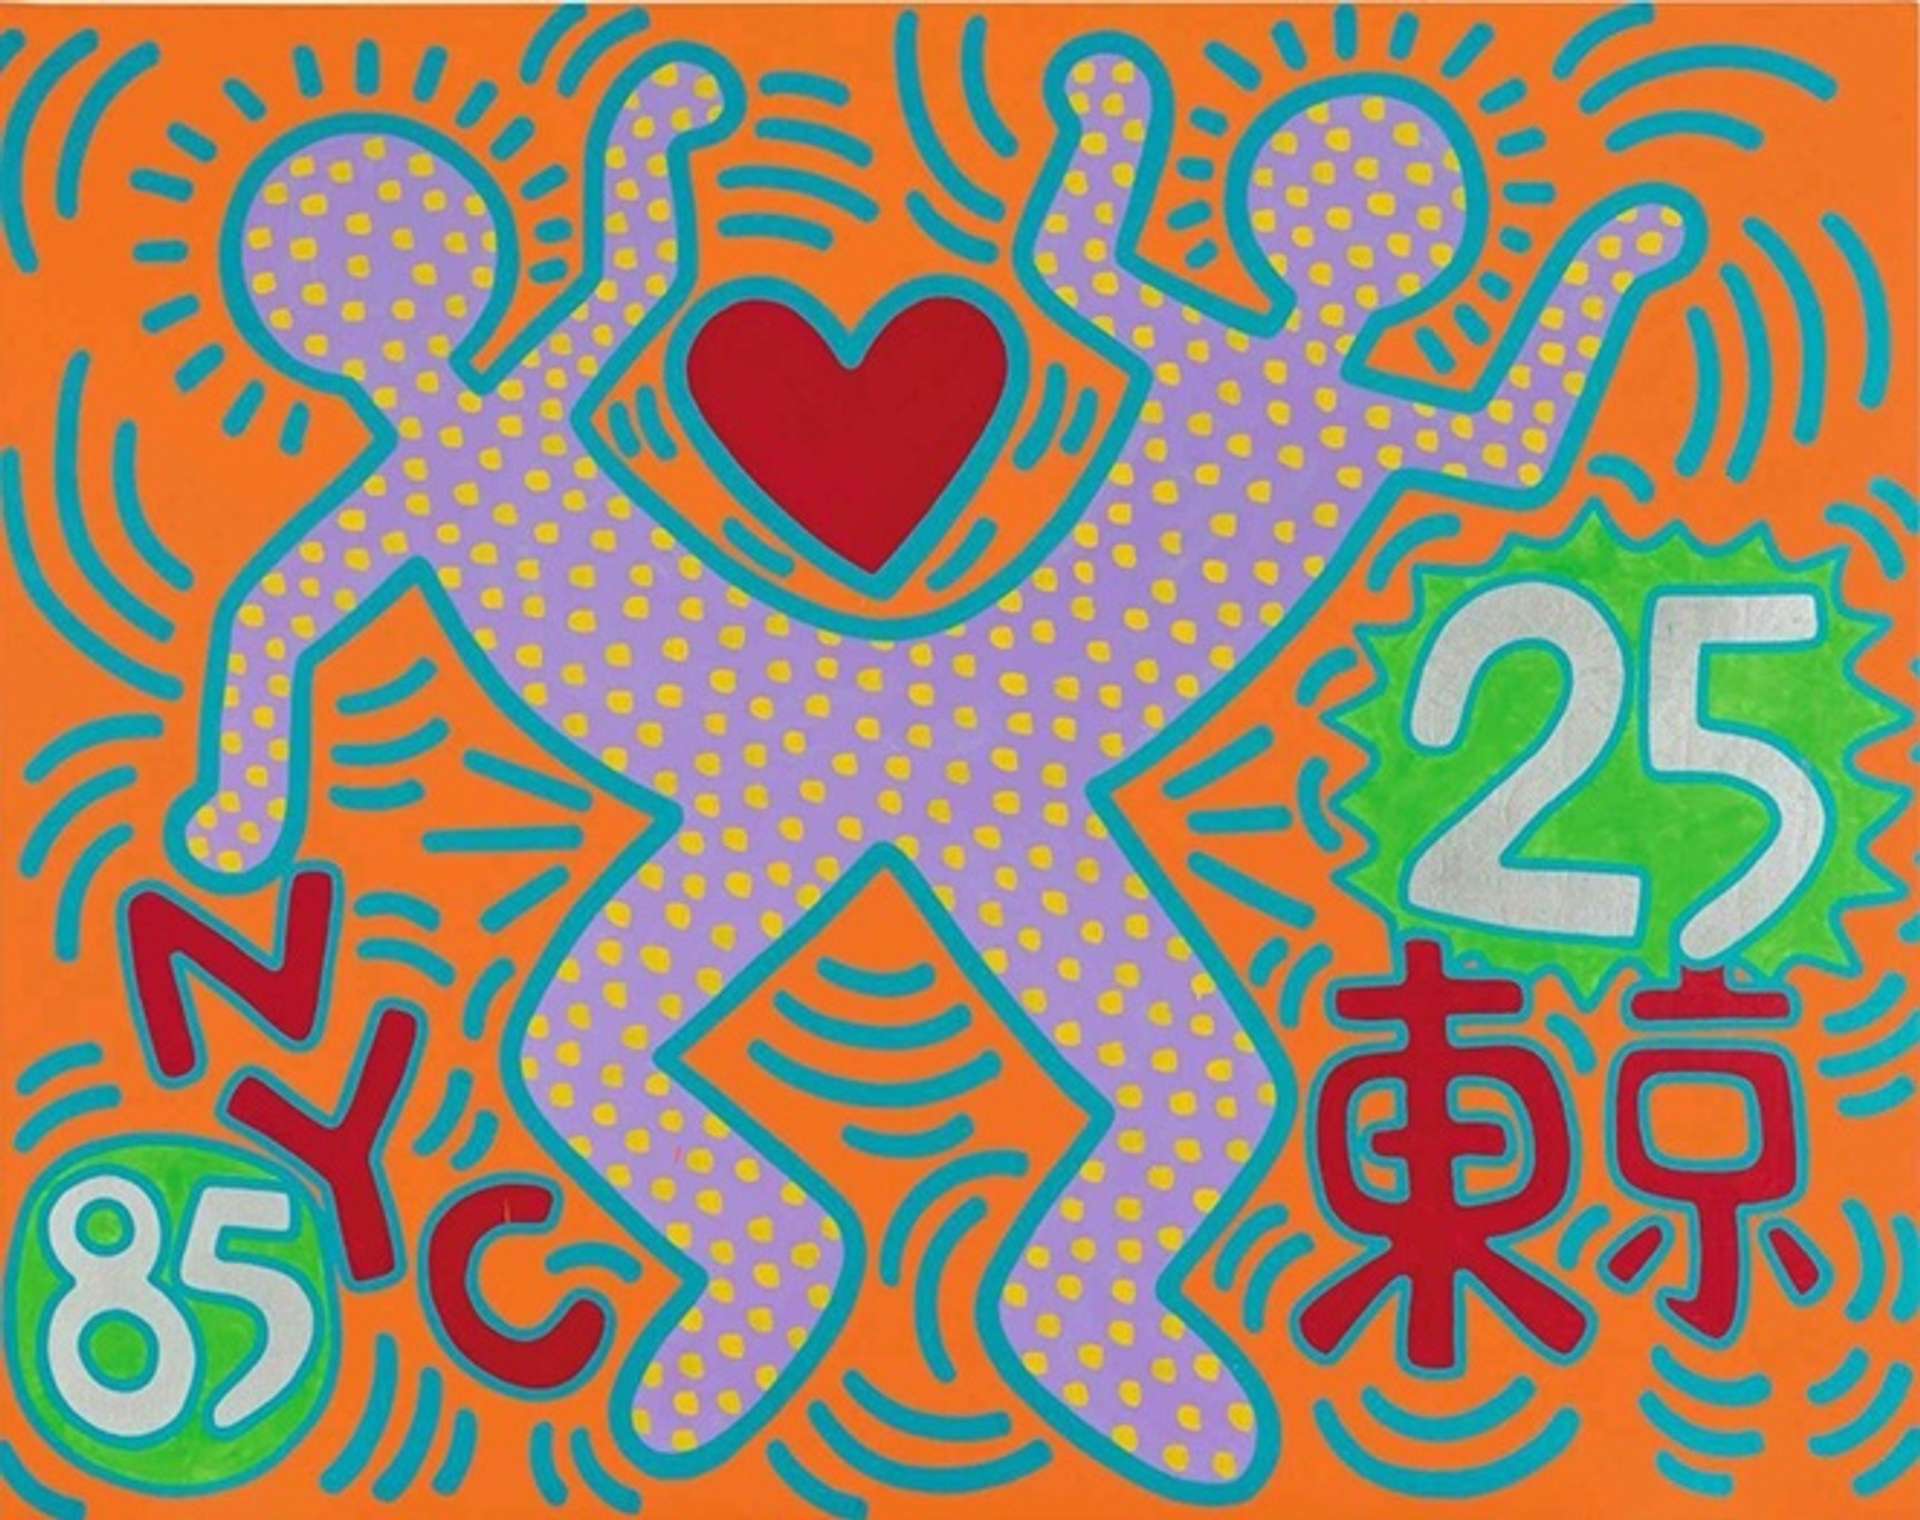 Sister Cities – For Tokyo by Keith Haring